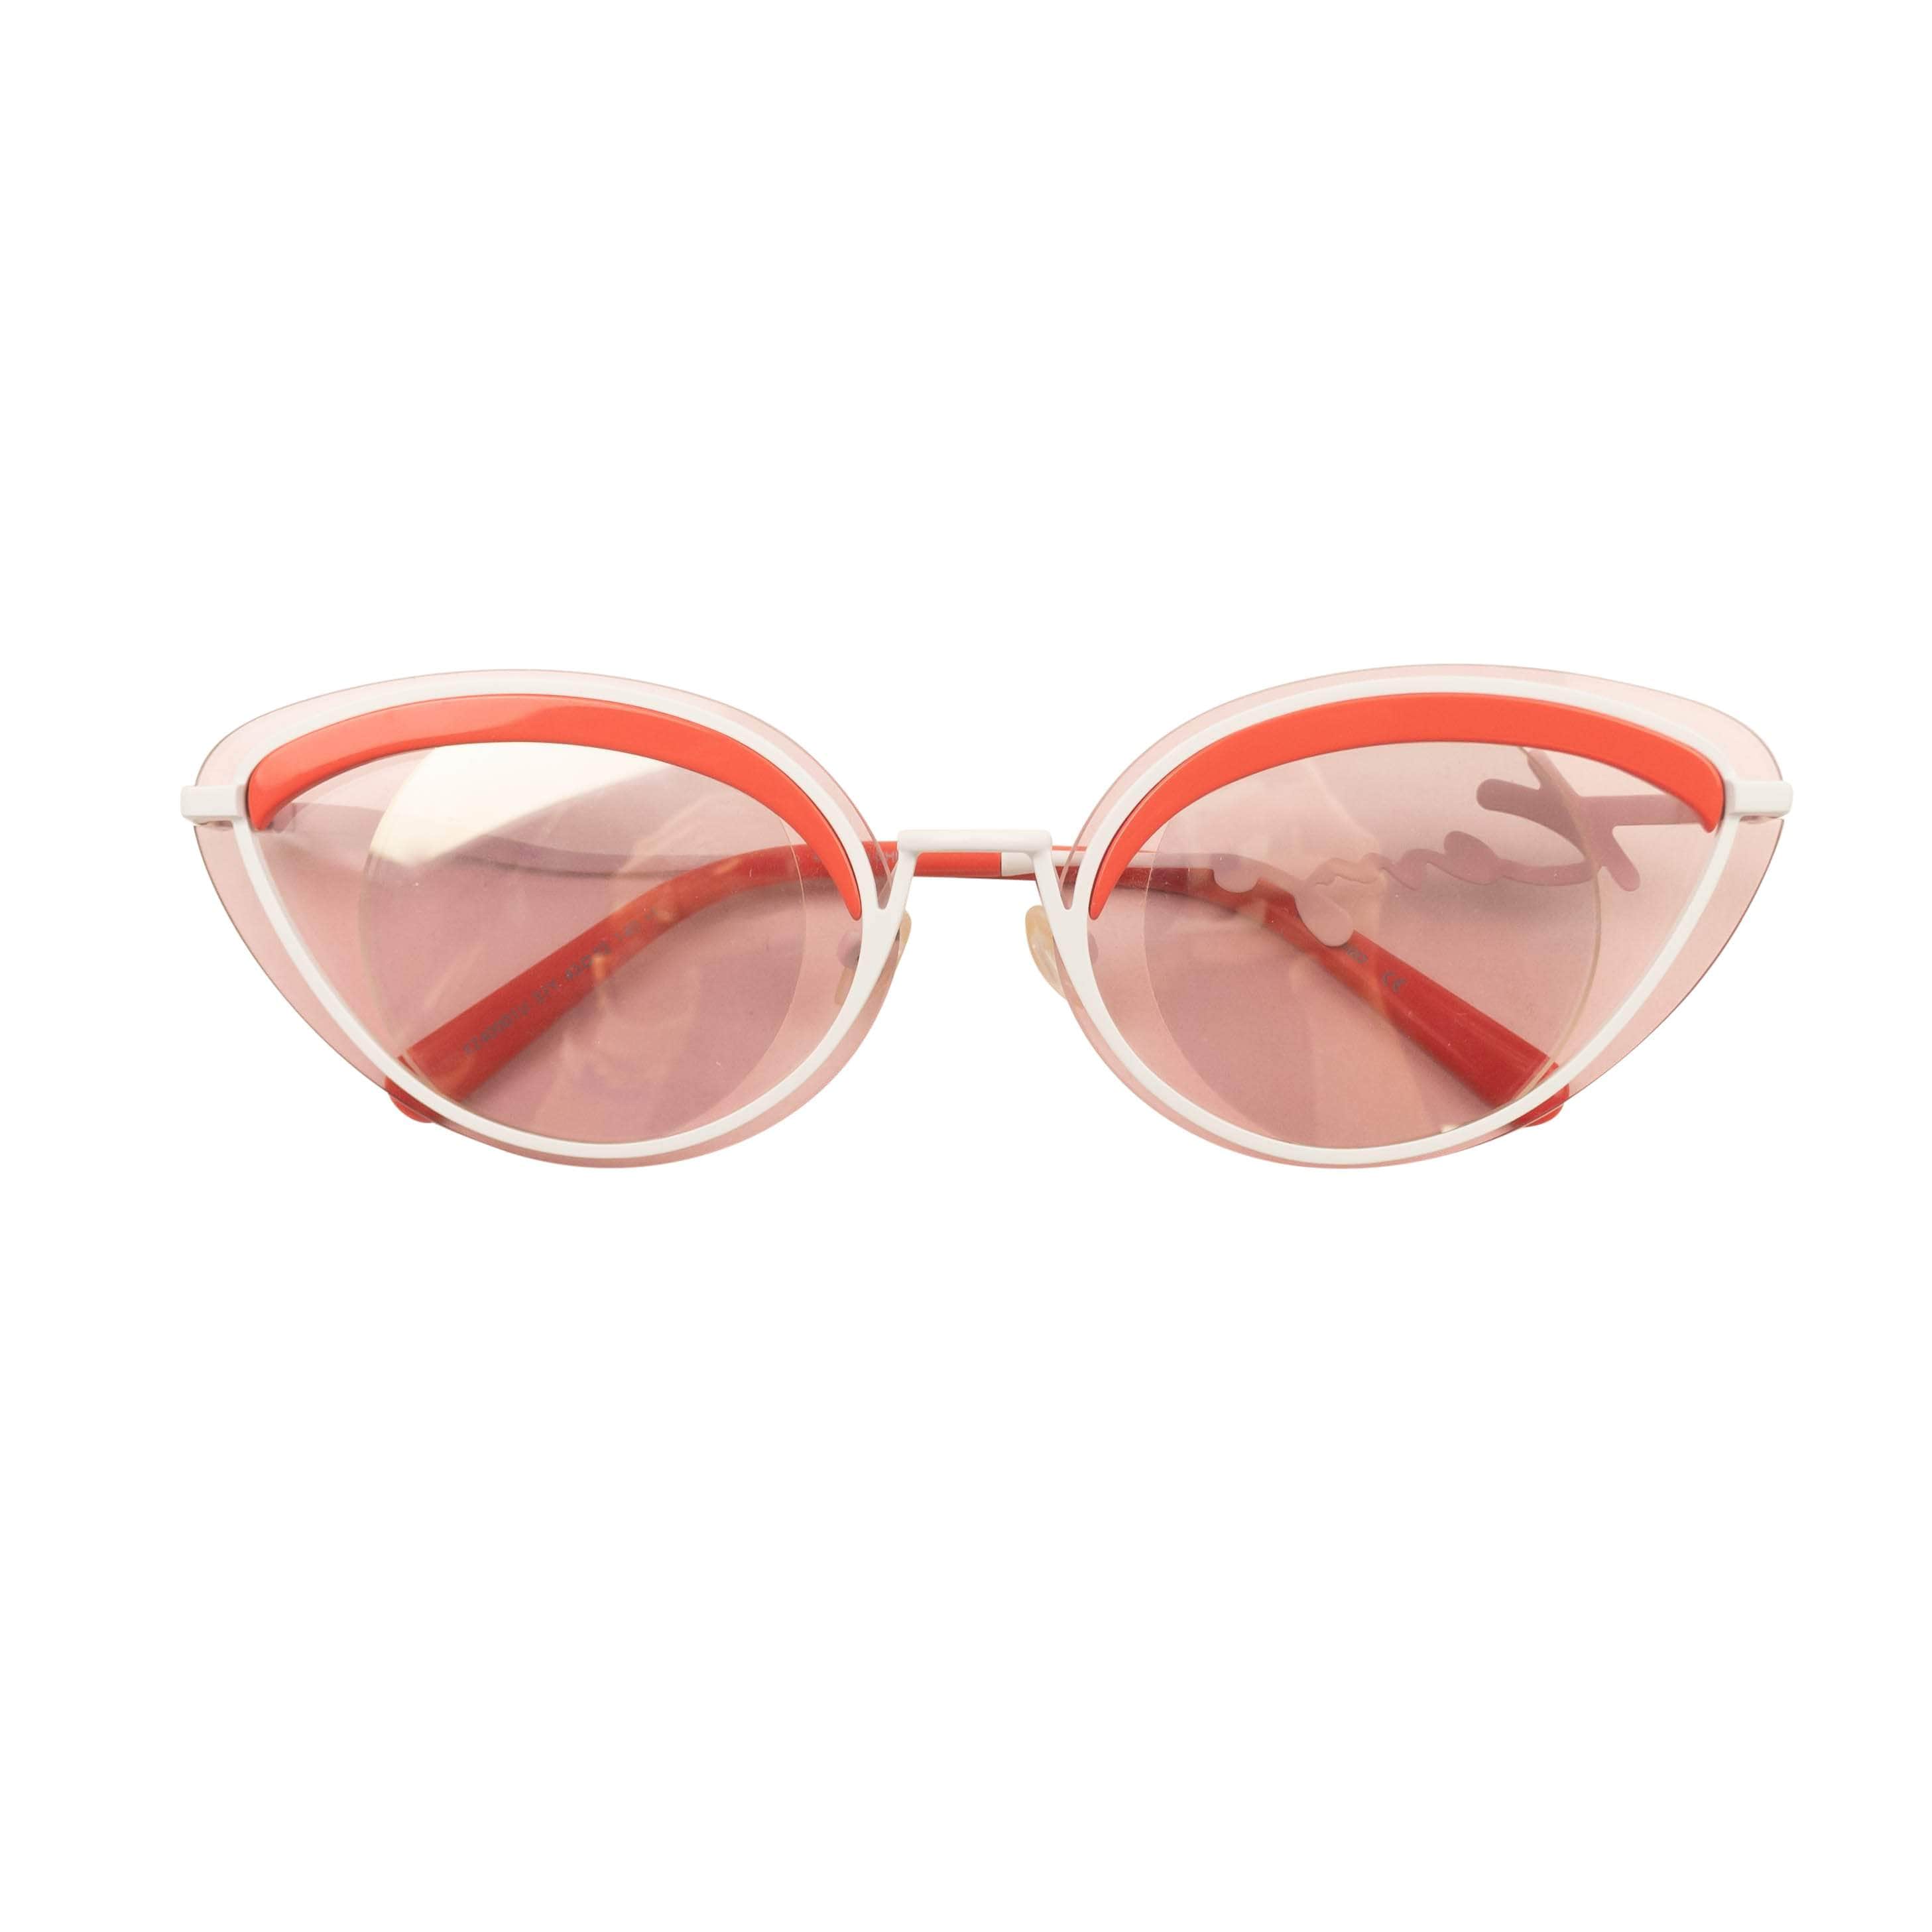 Kenzo Paris channelenable-all, chicmi, couponcollection, gender-mens, gender-womens, kenzo-paris, main-accessories, mens-shoes, size-os, under-250, unisex-eyewear OS Violet Cat Eye Wire Sunglasses 95-KNZ-3020/OS 95-KNZ-3020/OS